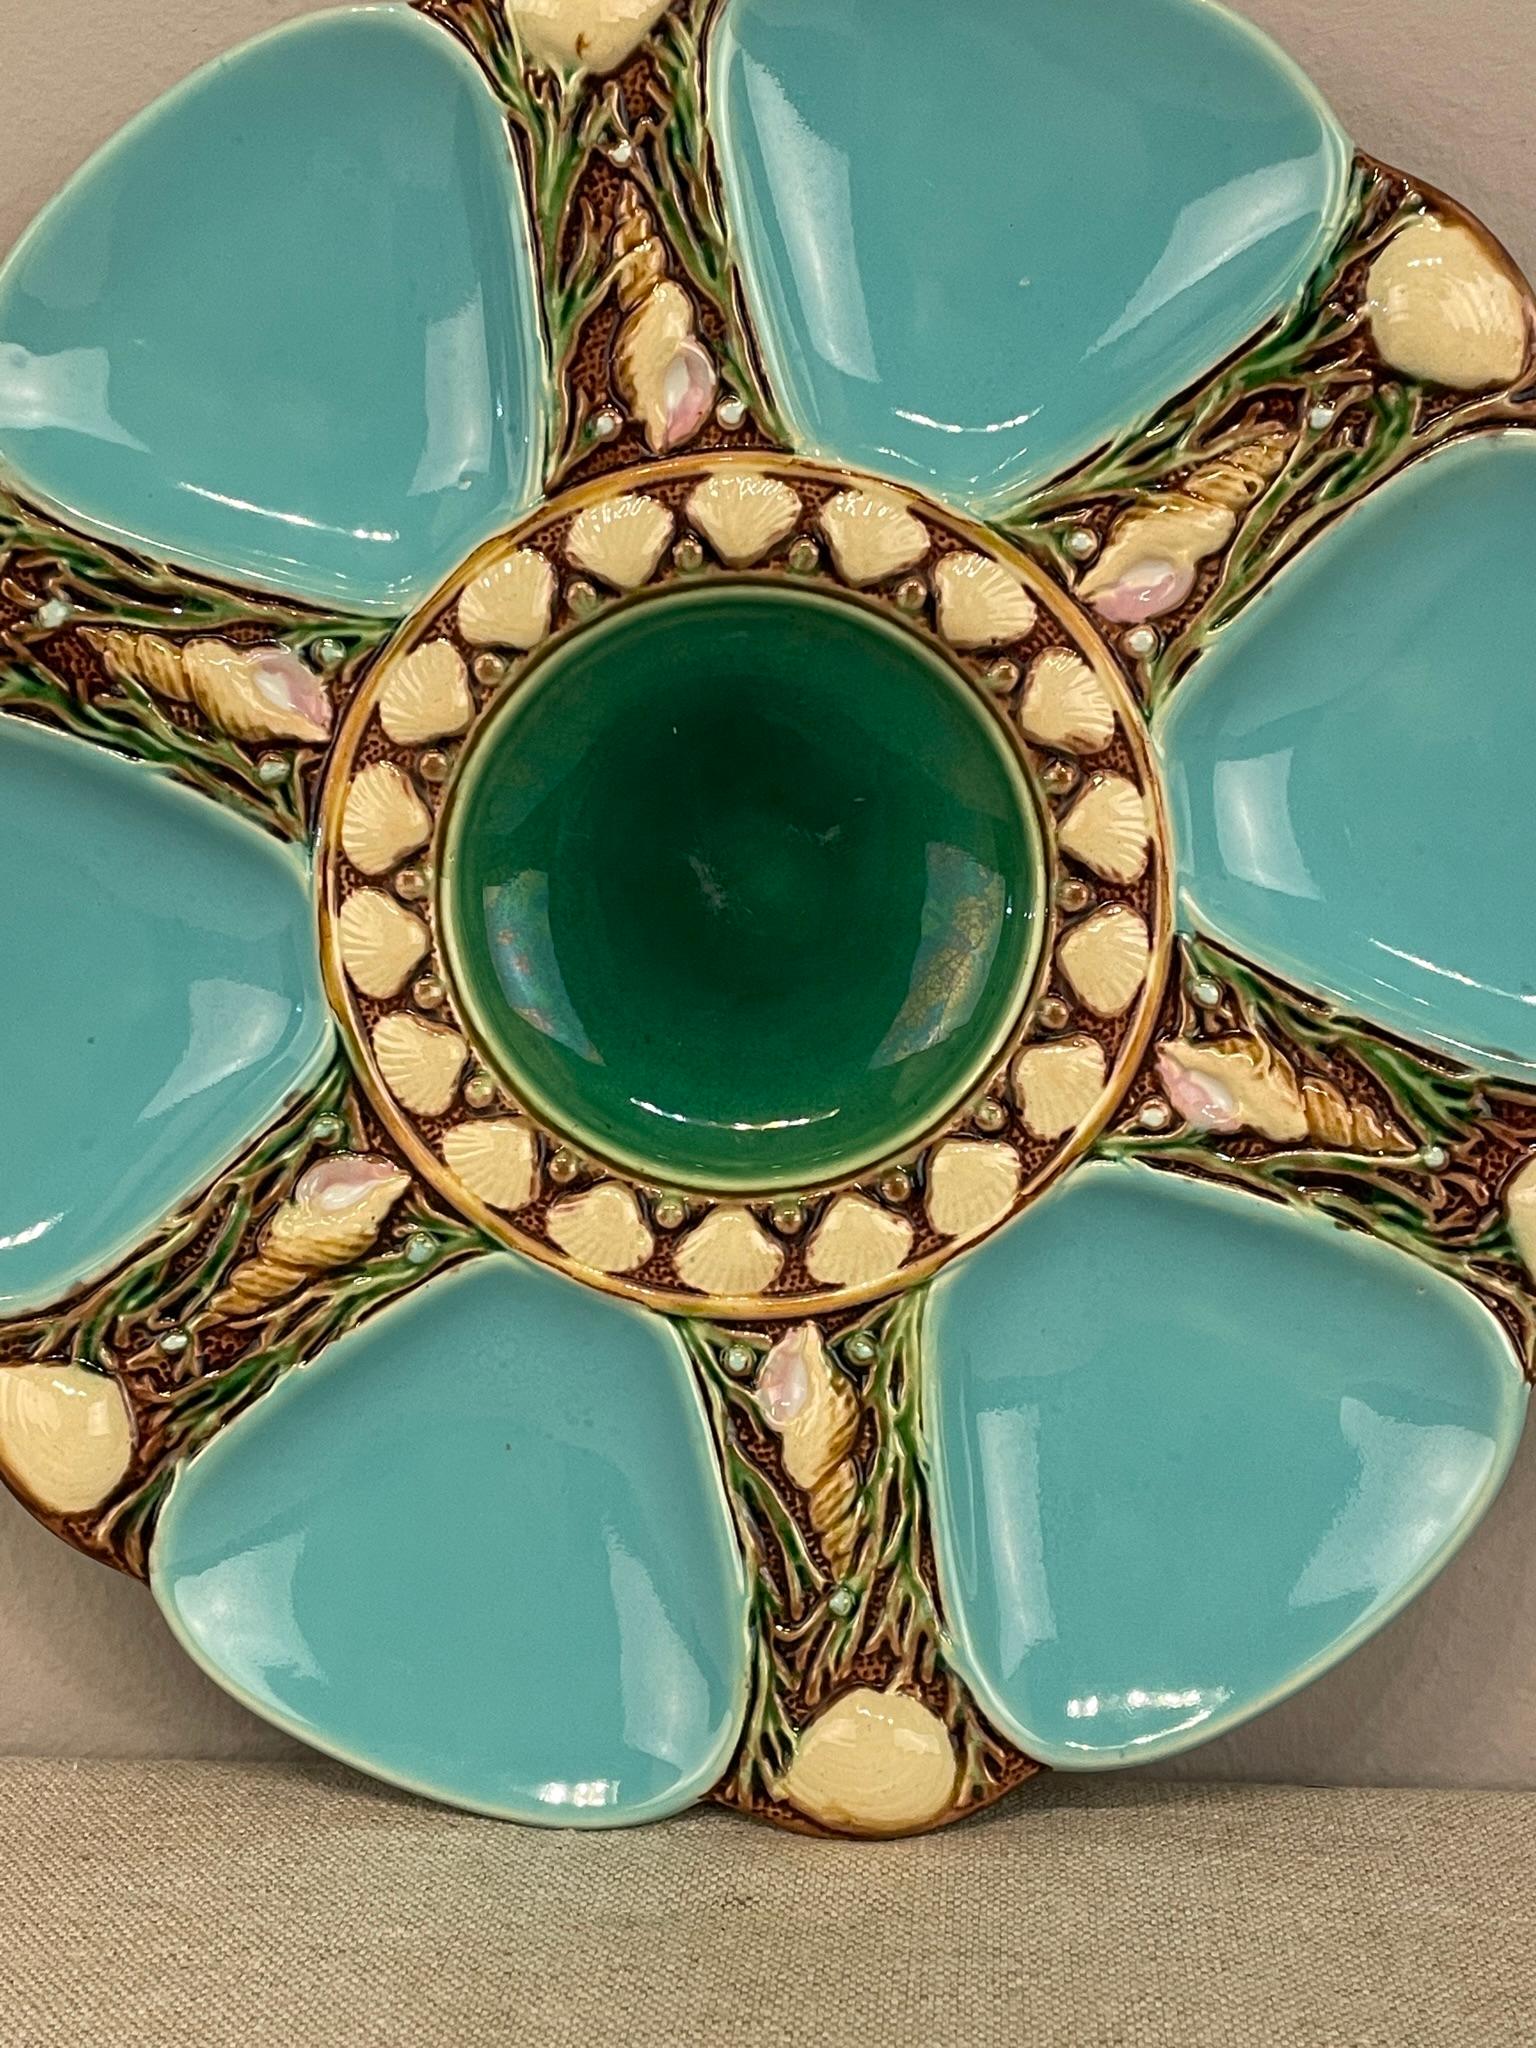 A 19th Century Majolica Turquoise Minton plate, with 6 turquoise oyster well separated with seashells in a relief. With the appropriate marks on the back, stamped 1323, produced by Minton Pottery in England. Dimensions are 9.25 ” diameter and 1”